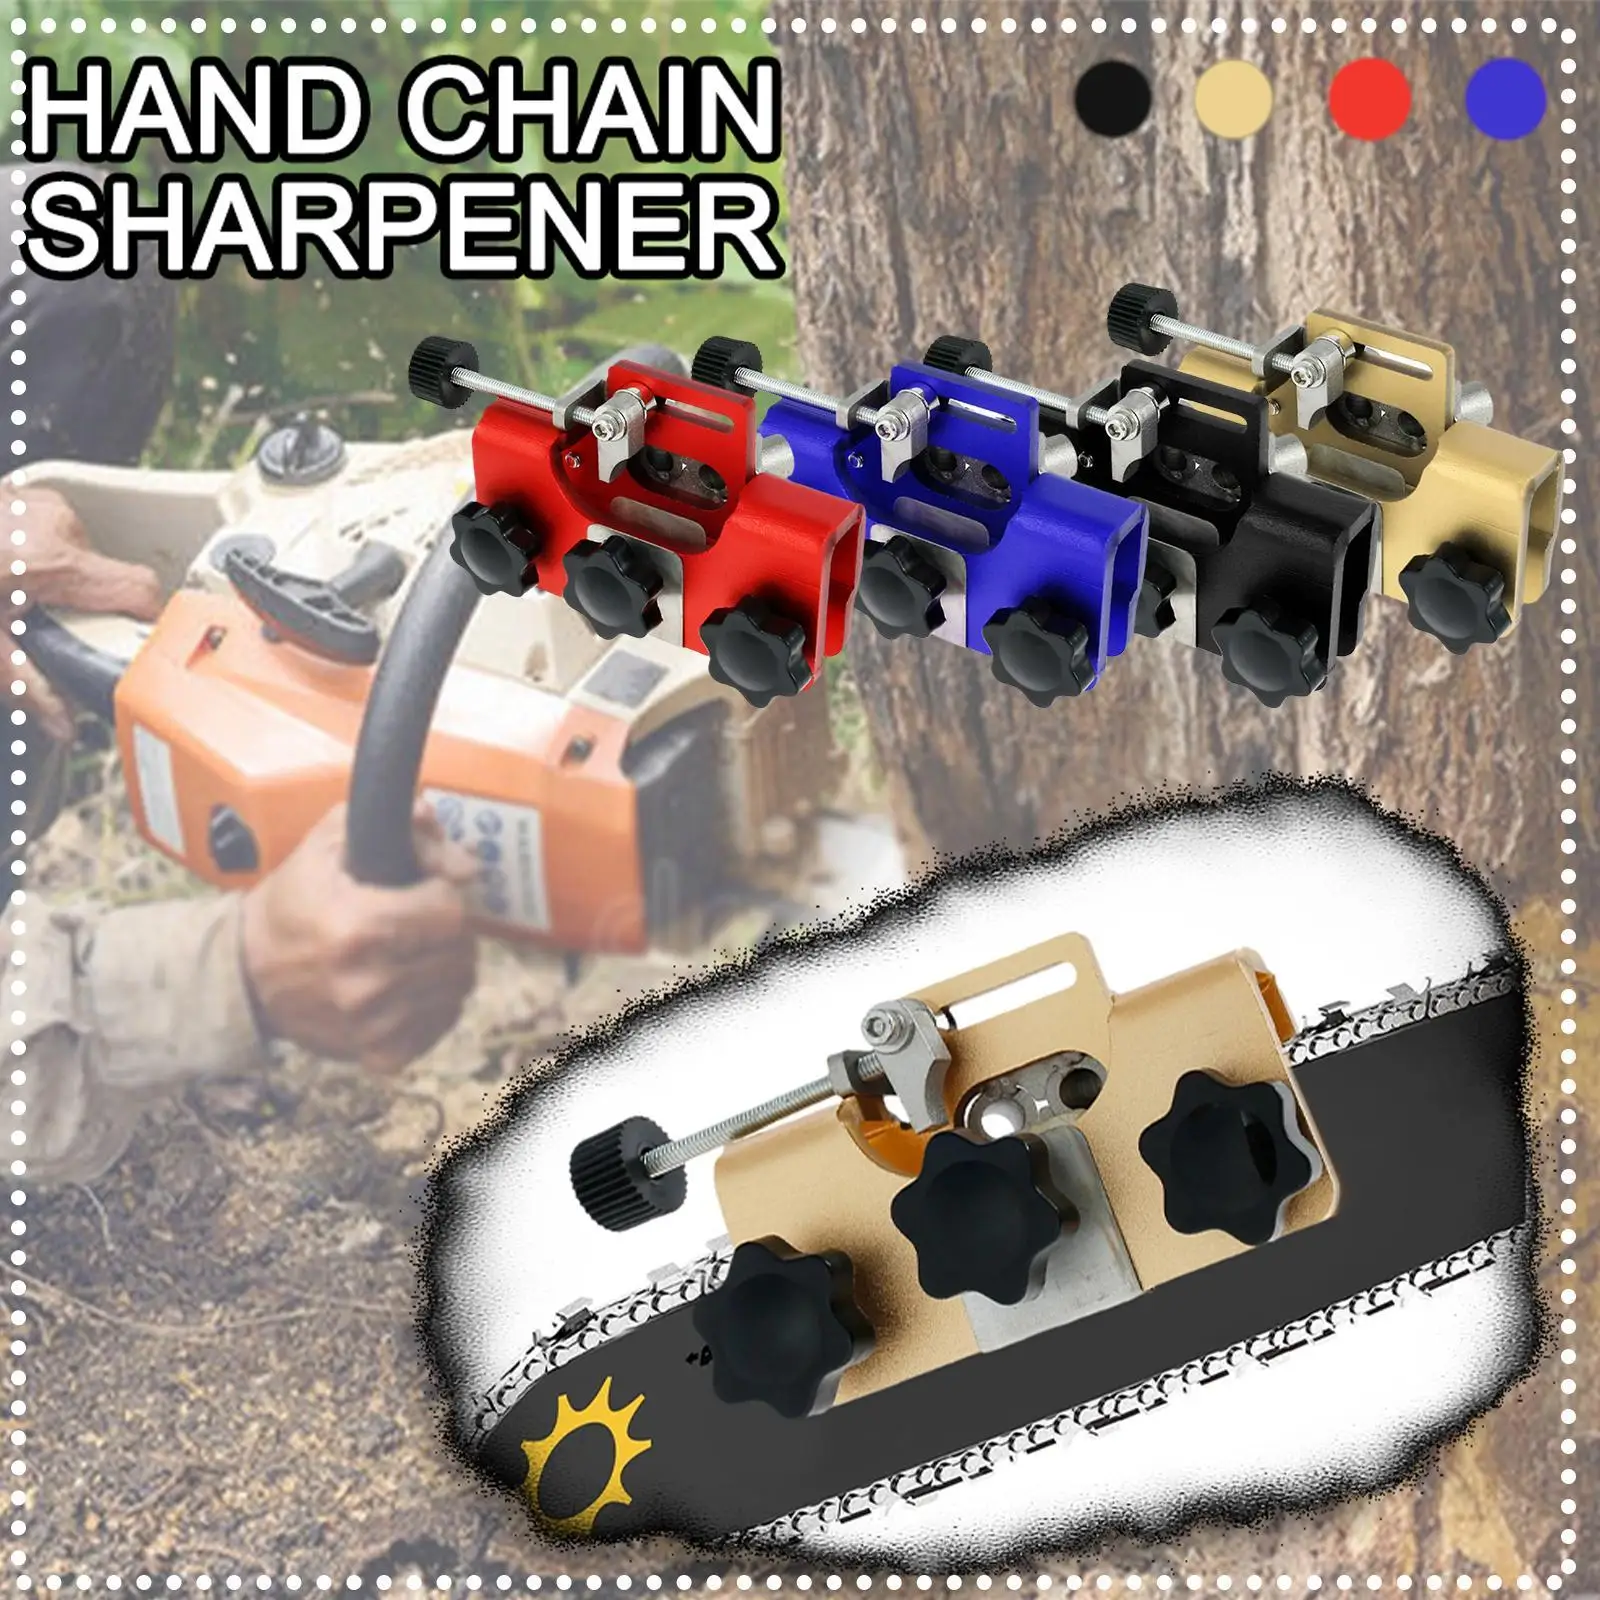 

For Most Chainsaws Electric Saws Chainsaw Sharpener With 1 Grinder Stones Chainsaw Chain Sharpening Jig Chain Saw Sharpener Too